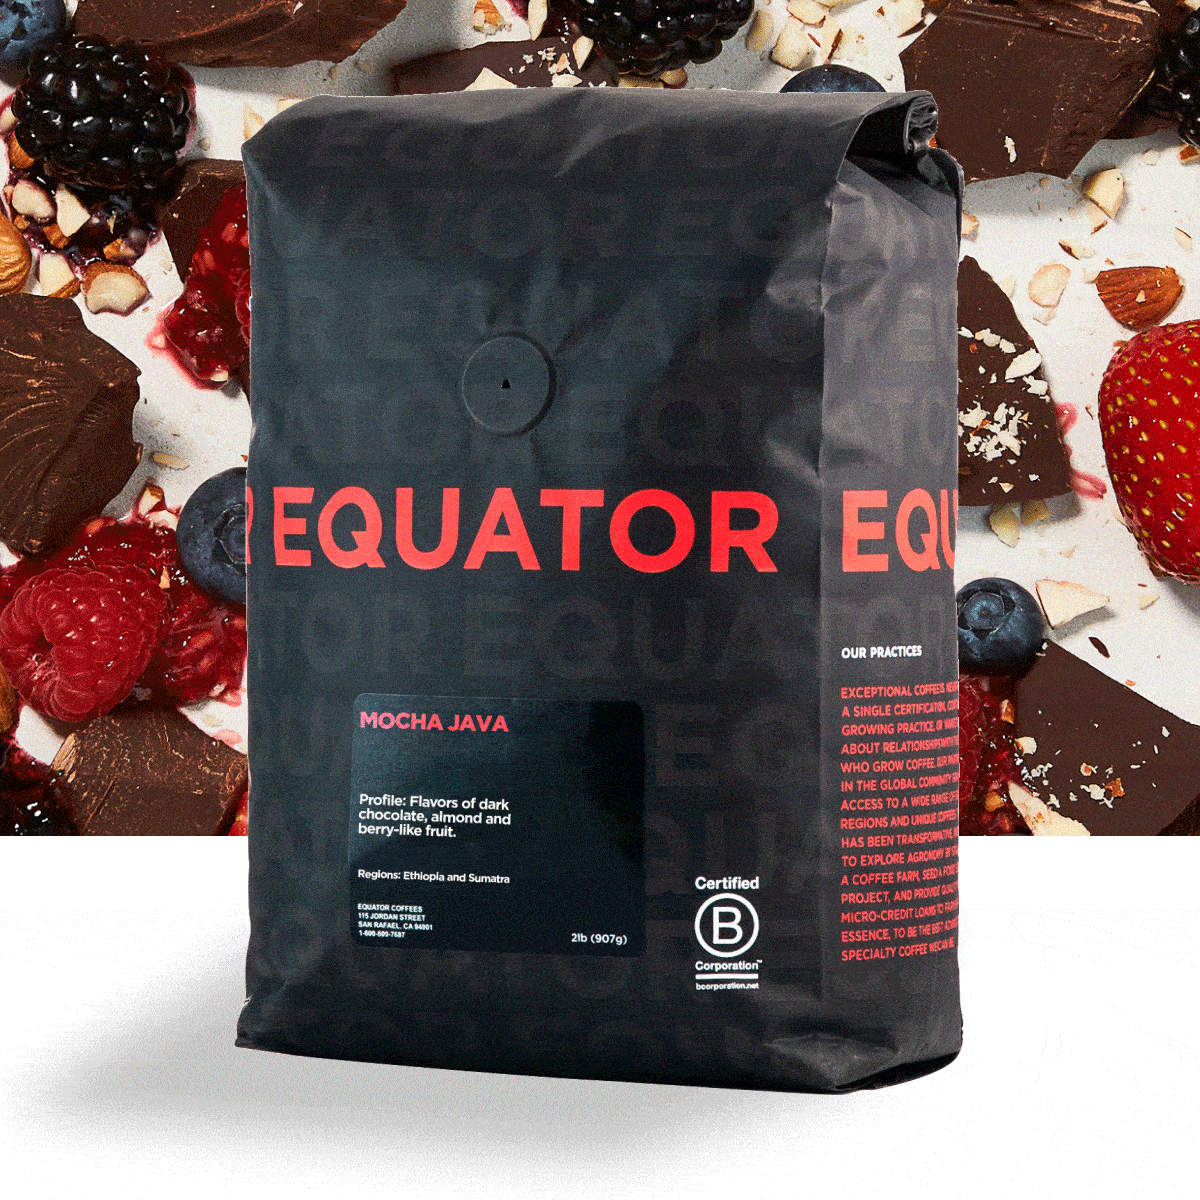 Free Shipping today & tomorrow only on 2lb Bags